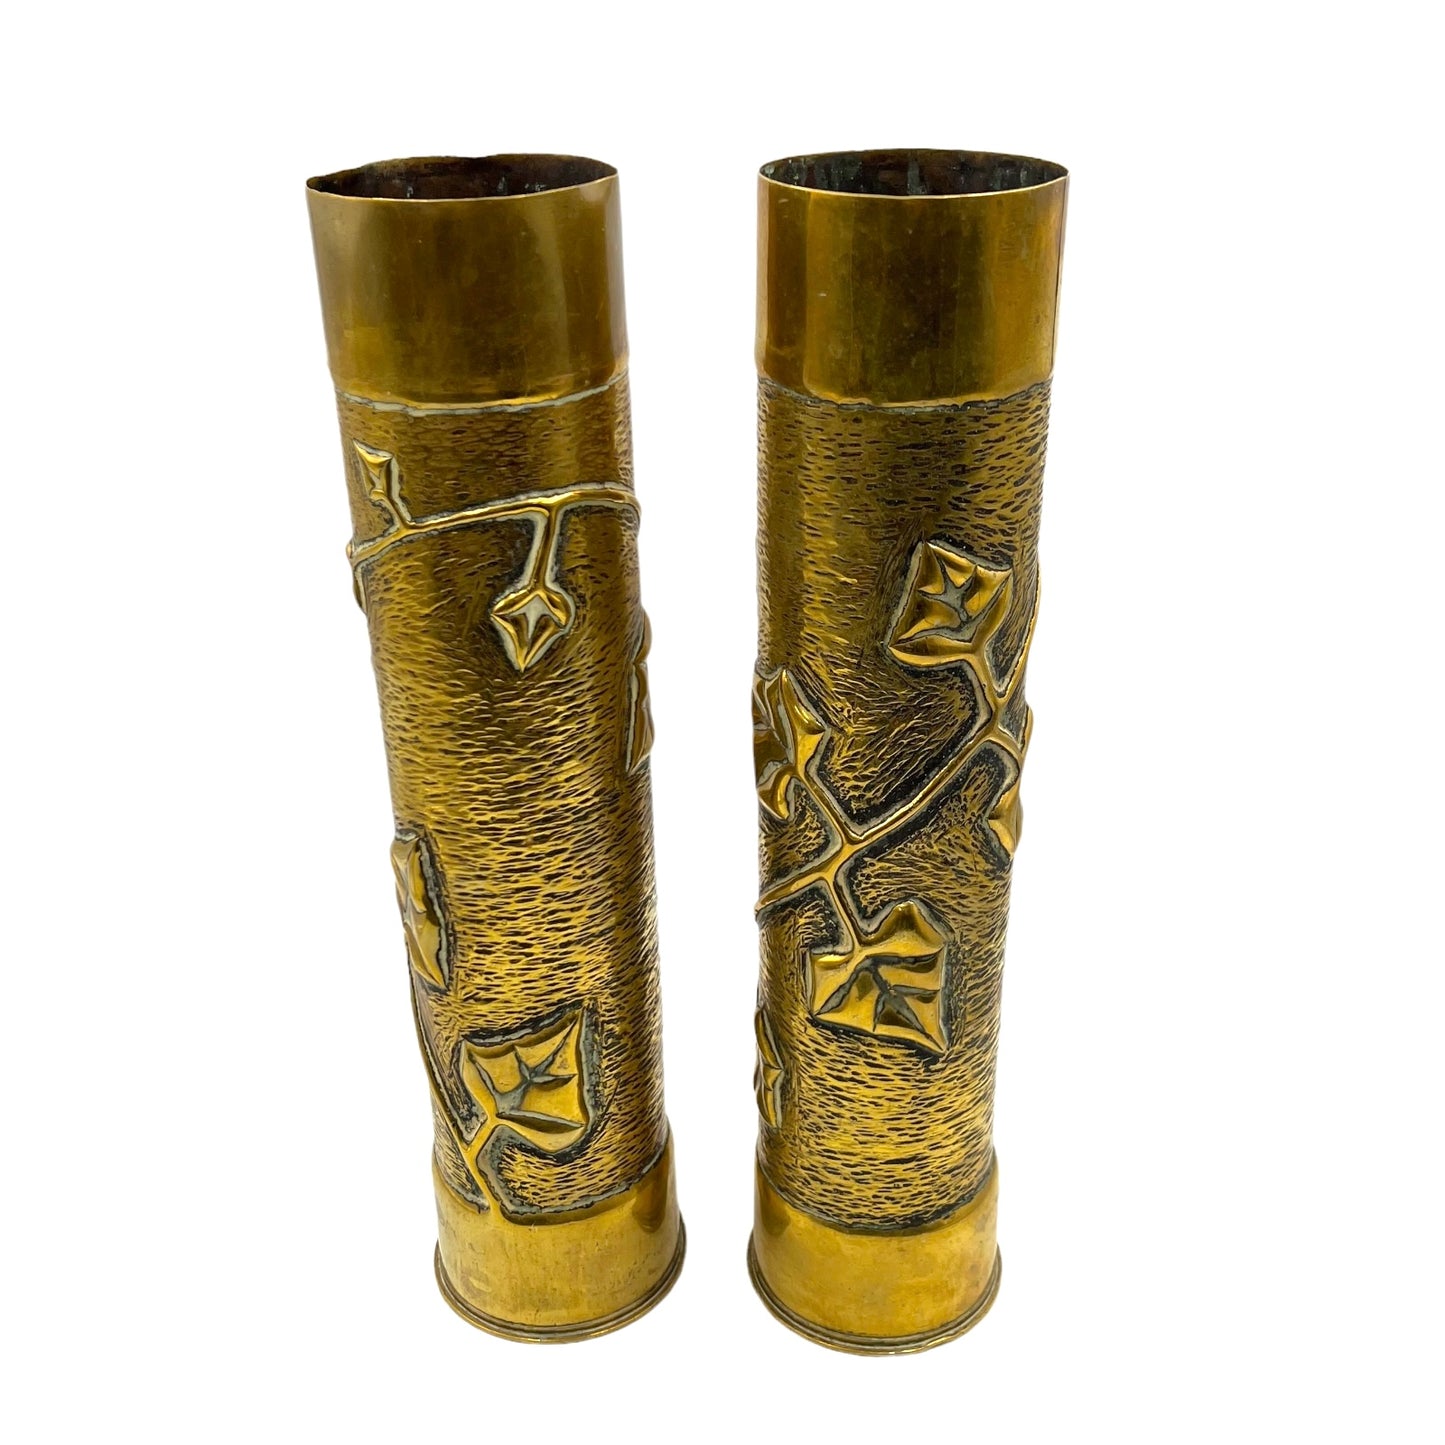 Pair of WW1 brass shell cases upcycled as trench art vases